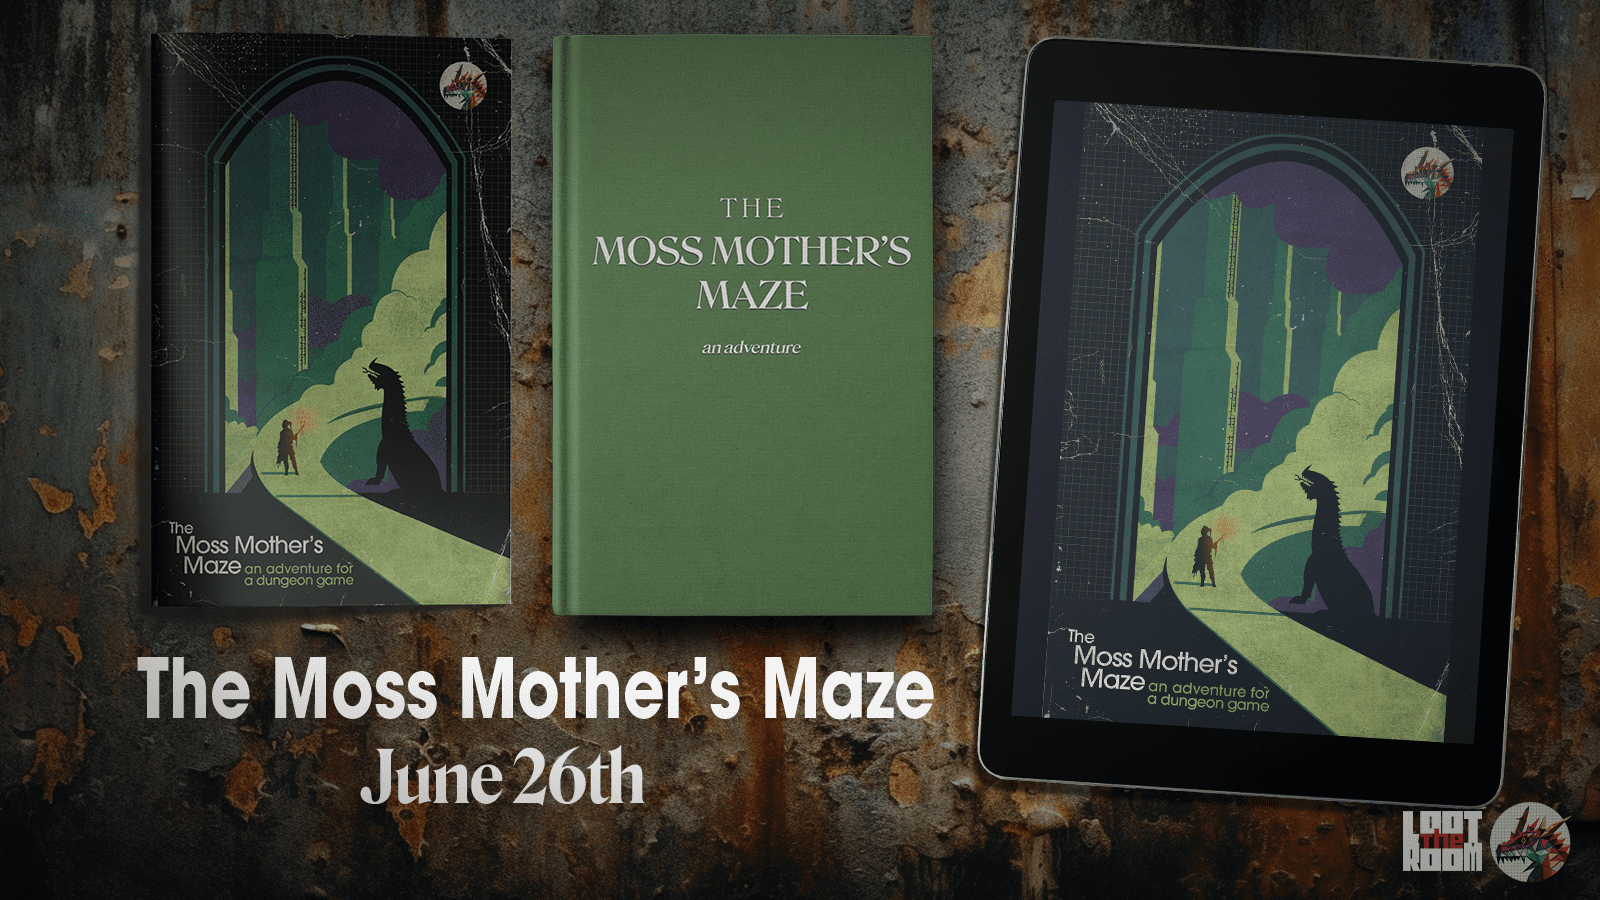  'The Moss Mother's Maze' cover with special edition